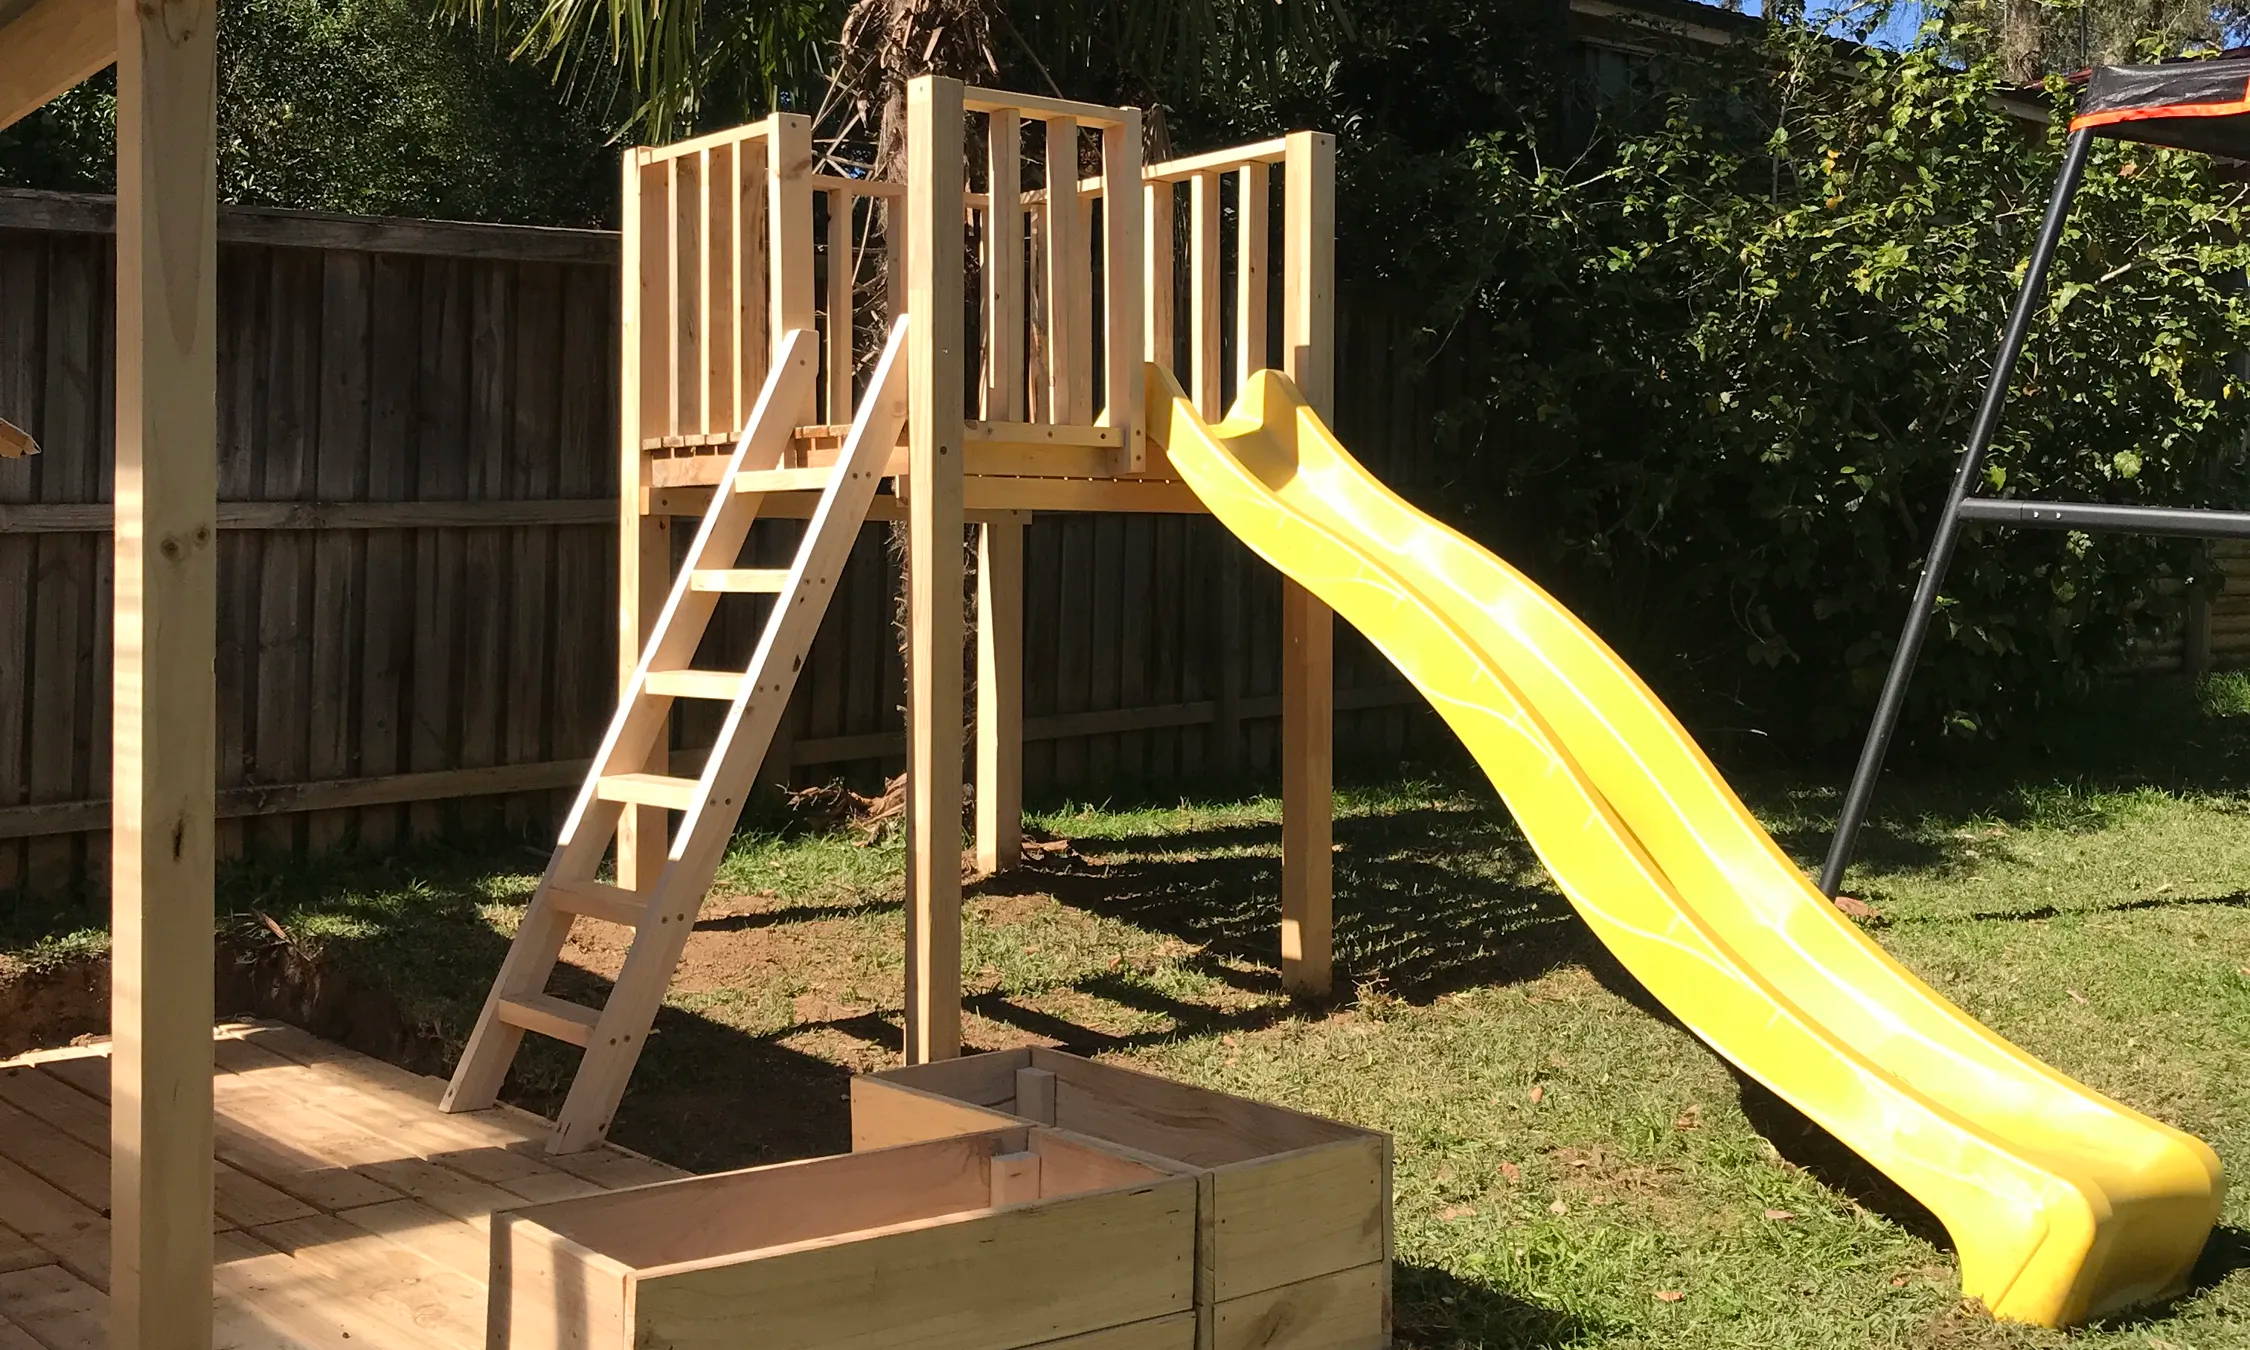 A raised platform cubbies with ladders and slides designed for families